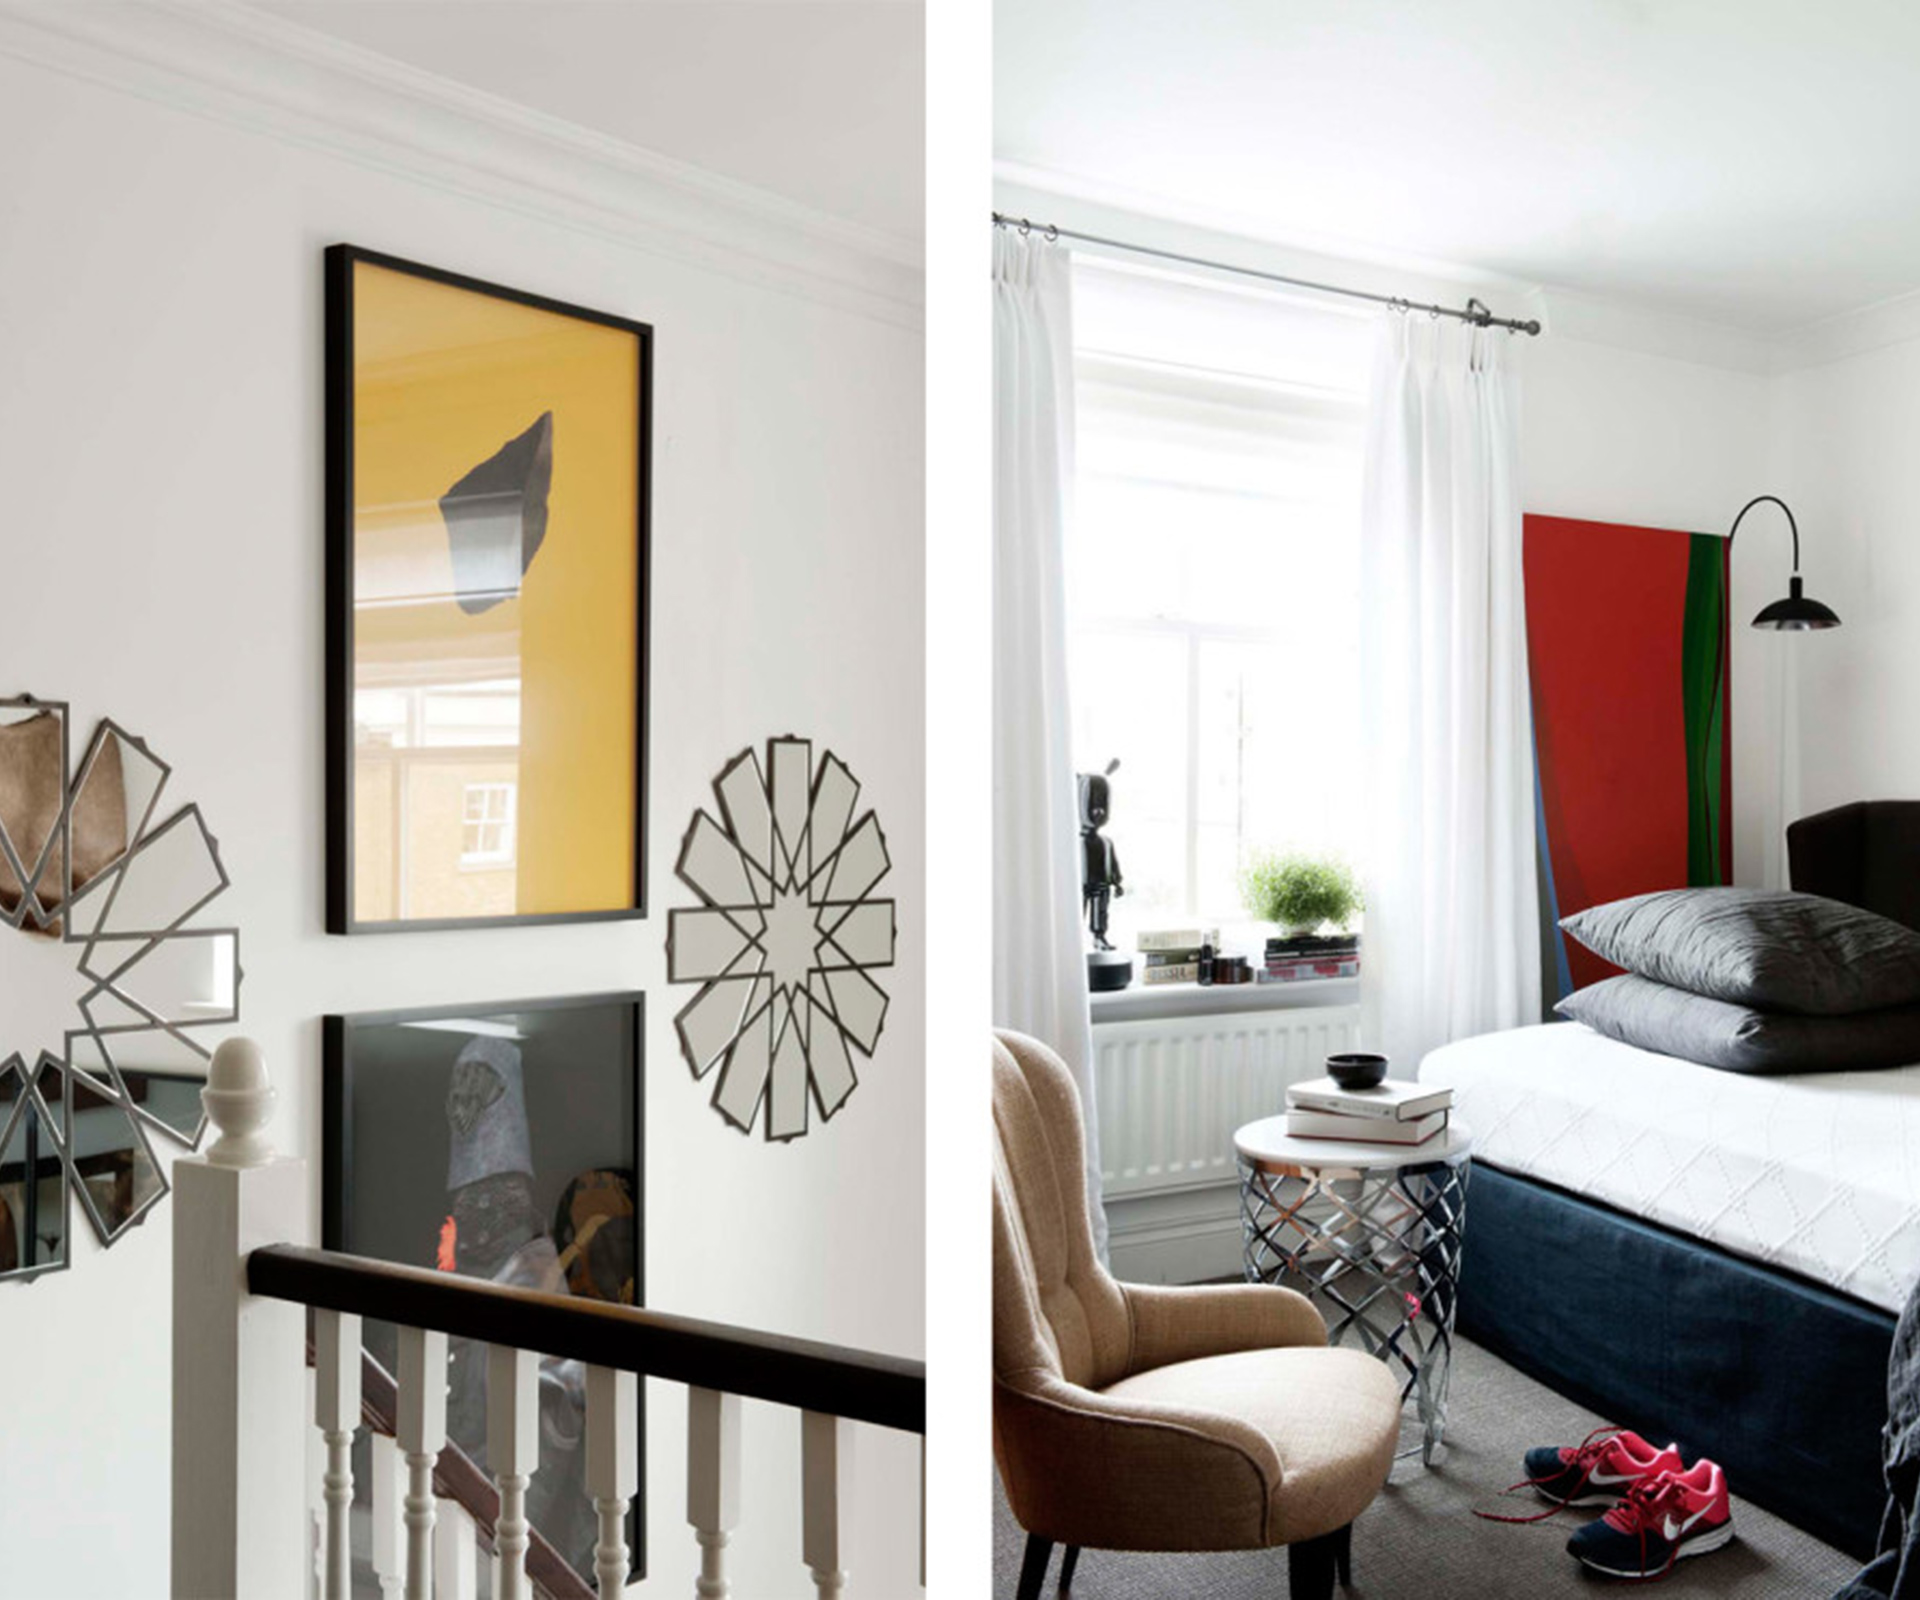 The flat's mezzanine level (left) has a view of artworks by Edwards + Johann, flanked by mirrors of Hall's own design. The vertical artwork in the bedroom (right) is unsigned from the 1960s and was a gift from Leslie Walford. The table is one of Hall's own designs.